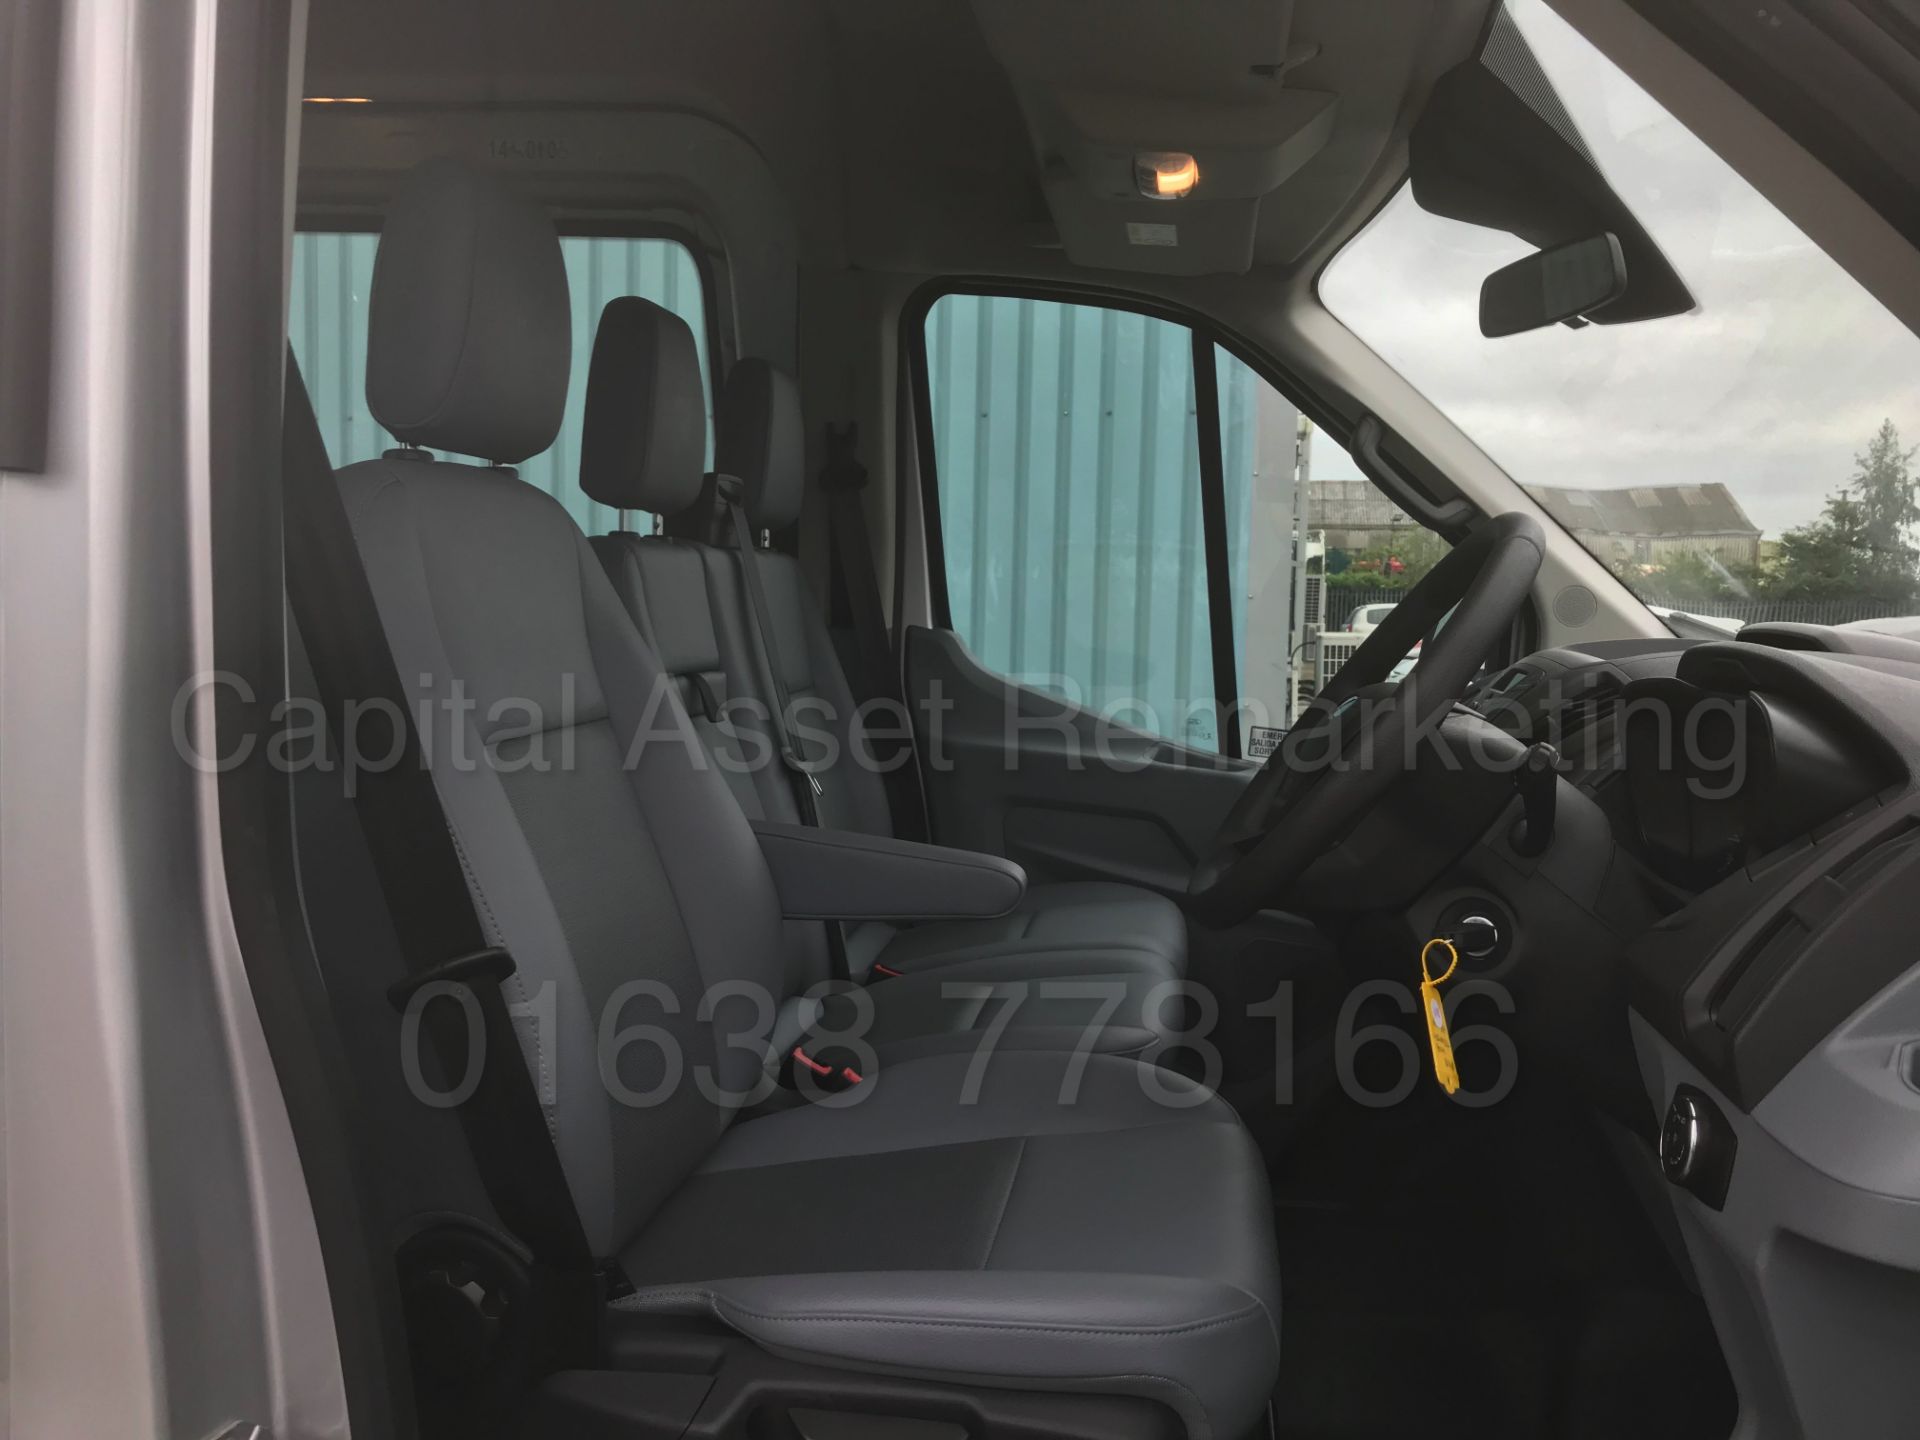 (On Sale) FORD TRANSIT LWB '15 SEATER MINI-BUS' (2018) '2.2 TDCI -125 BHP- 6 SPEED' 130 MILES ONLY ! - Image 35 of 50